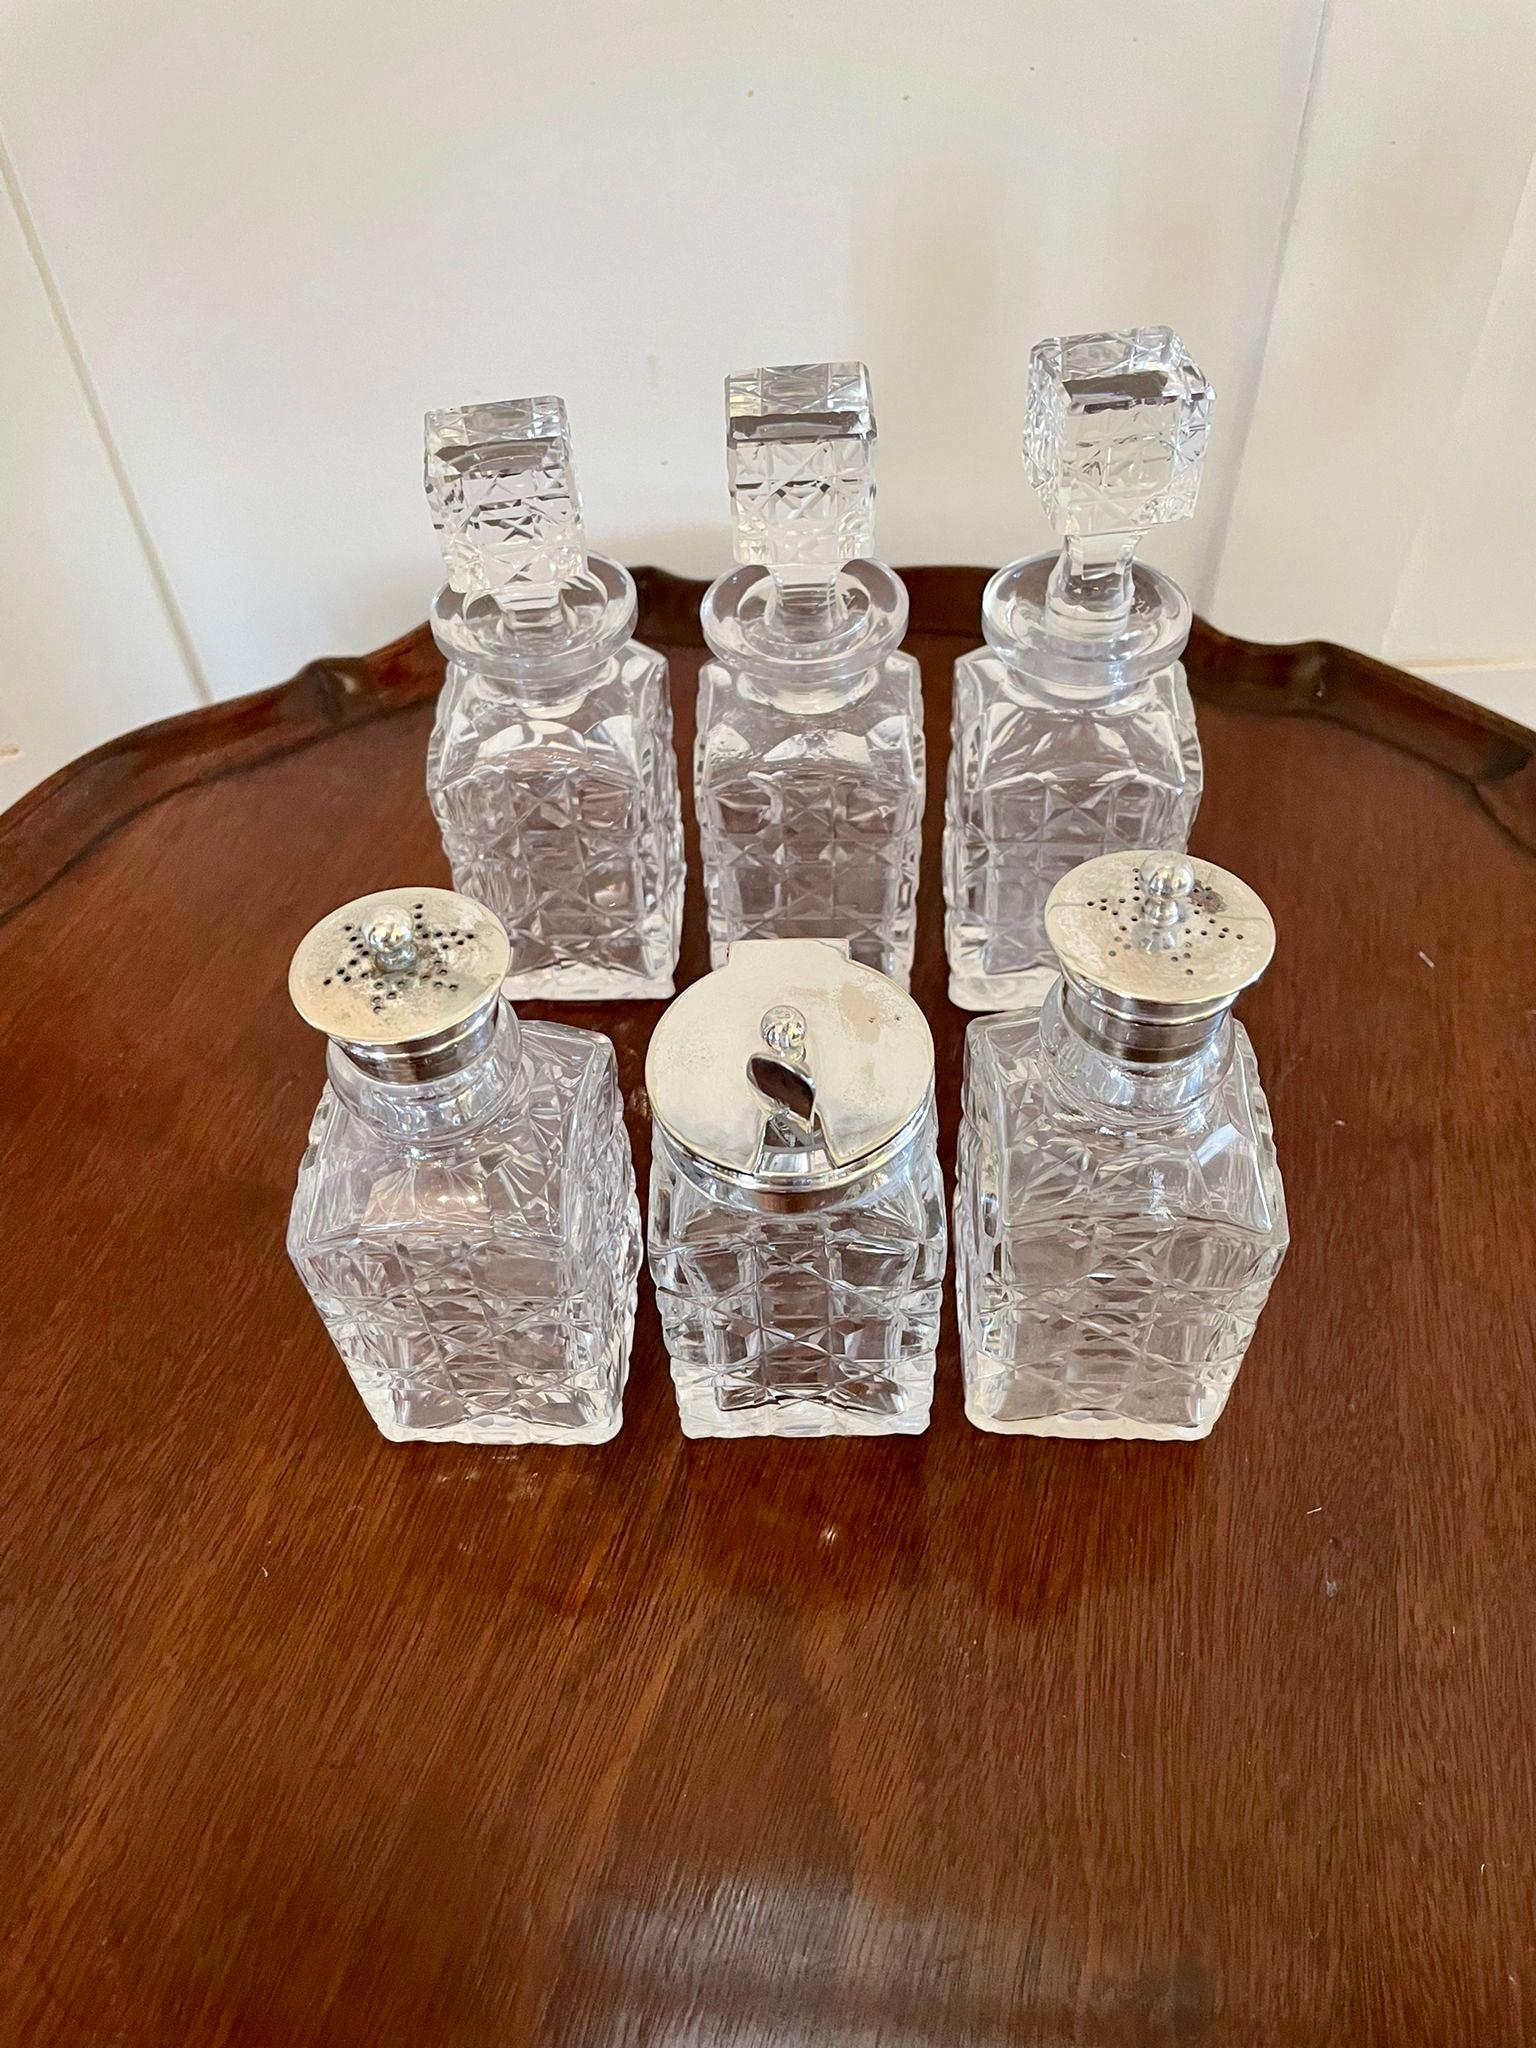 Quality antique silver plated six bottle cruet set consisting of a quality silver plated stand with six cut glass condiment bottle. The stand having a round carrying handle to the top, shaped shield to the sides and standing on ball feet.

An